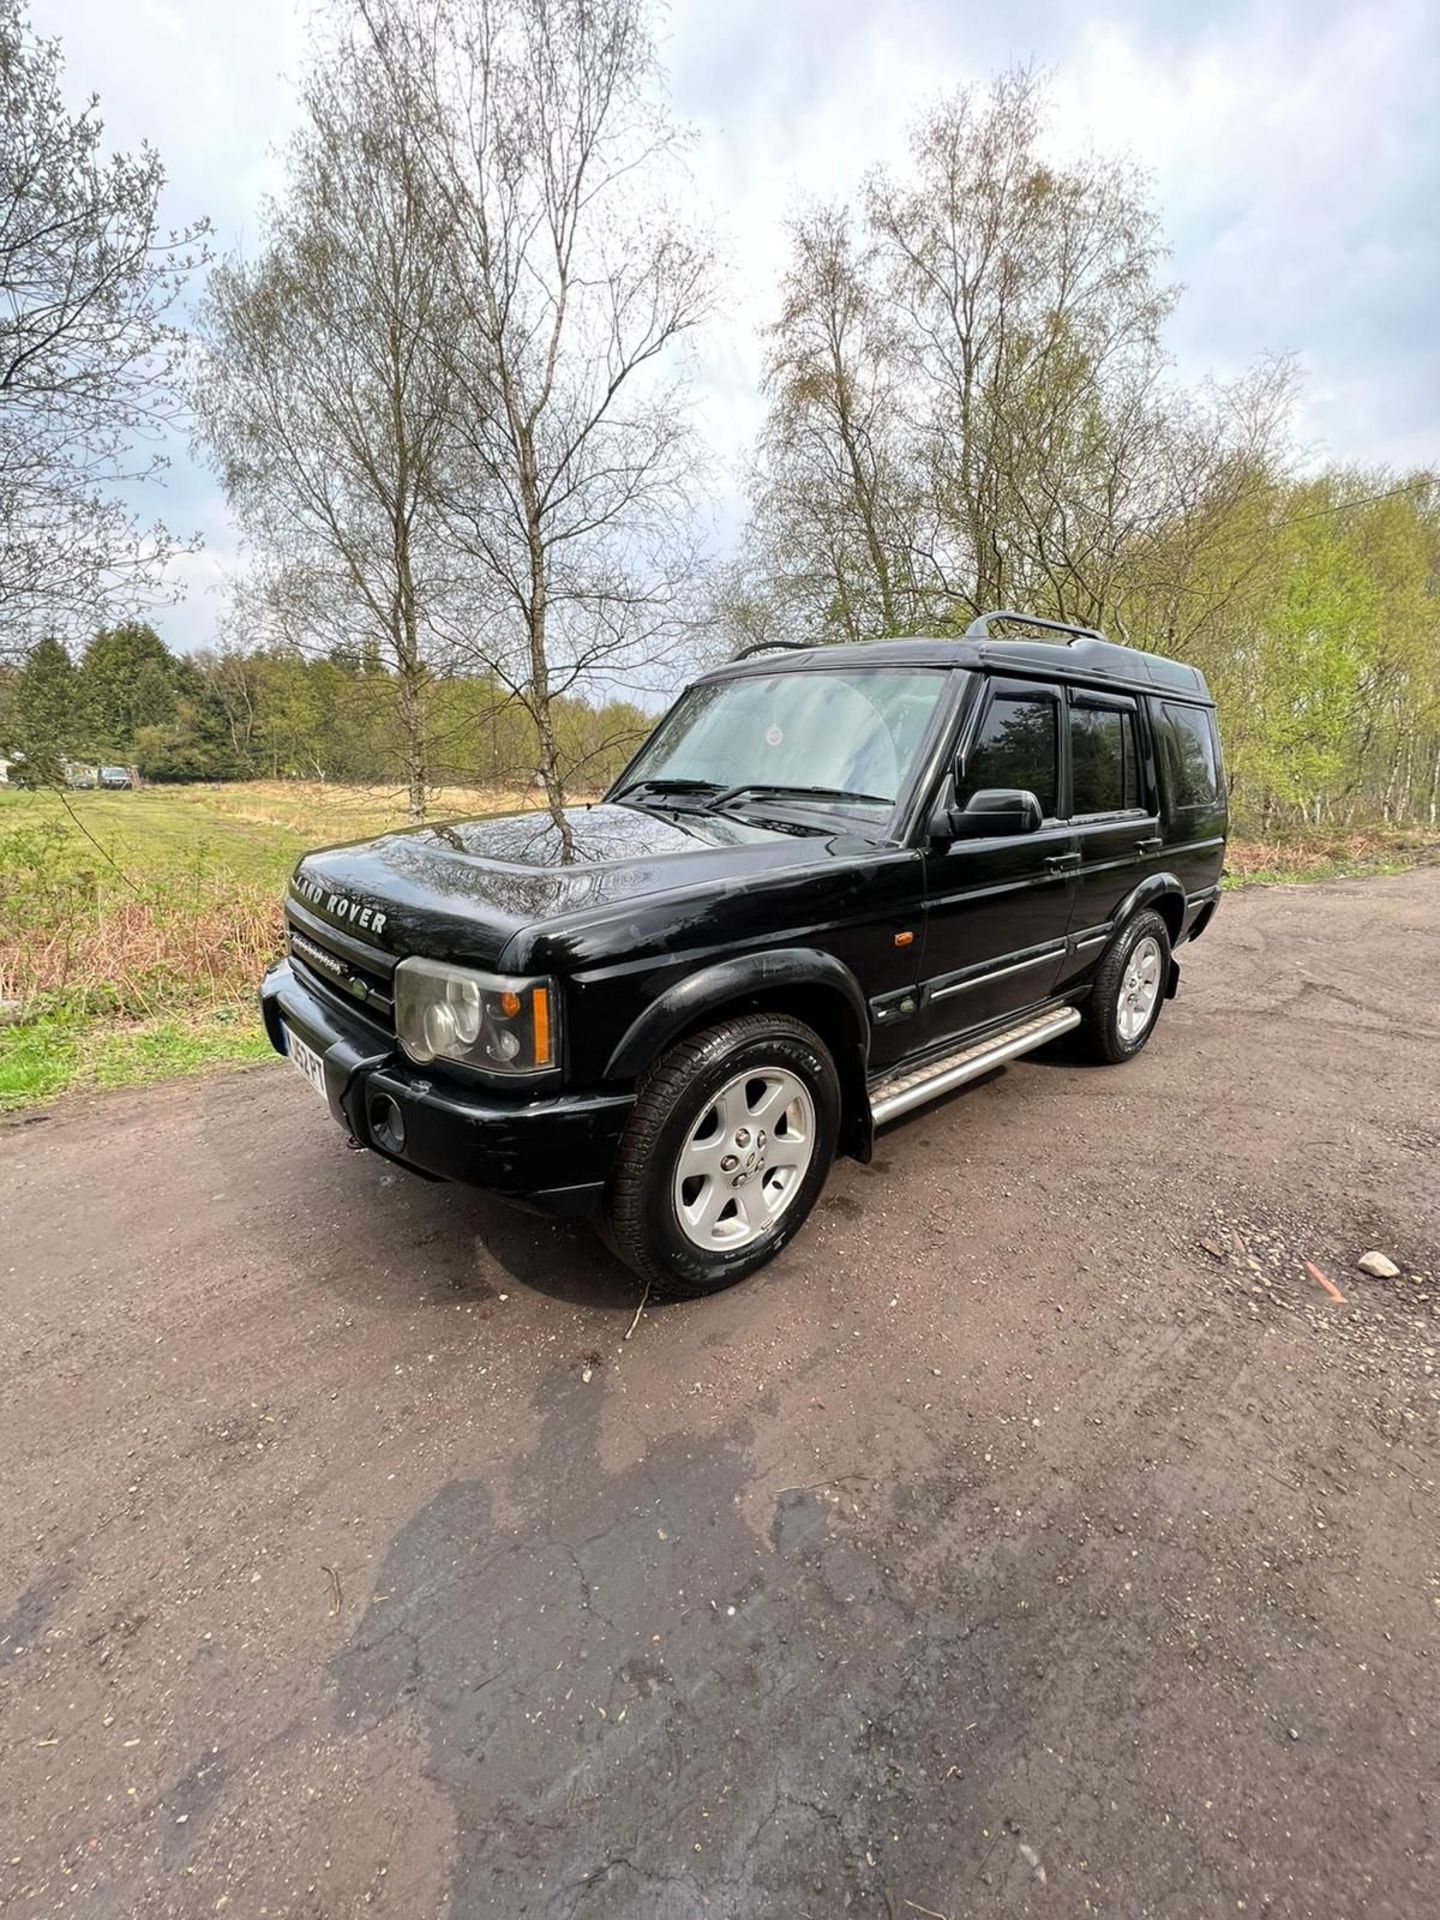 2002 52 PLATE LAND ROVER DISCOVERY 2 SUV ESTATE - TD5 - TOP OF THE RANGE - HALF LEATHER SEATS - Image 9 of 15